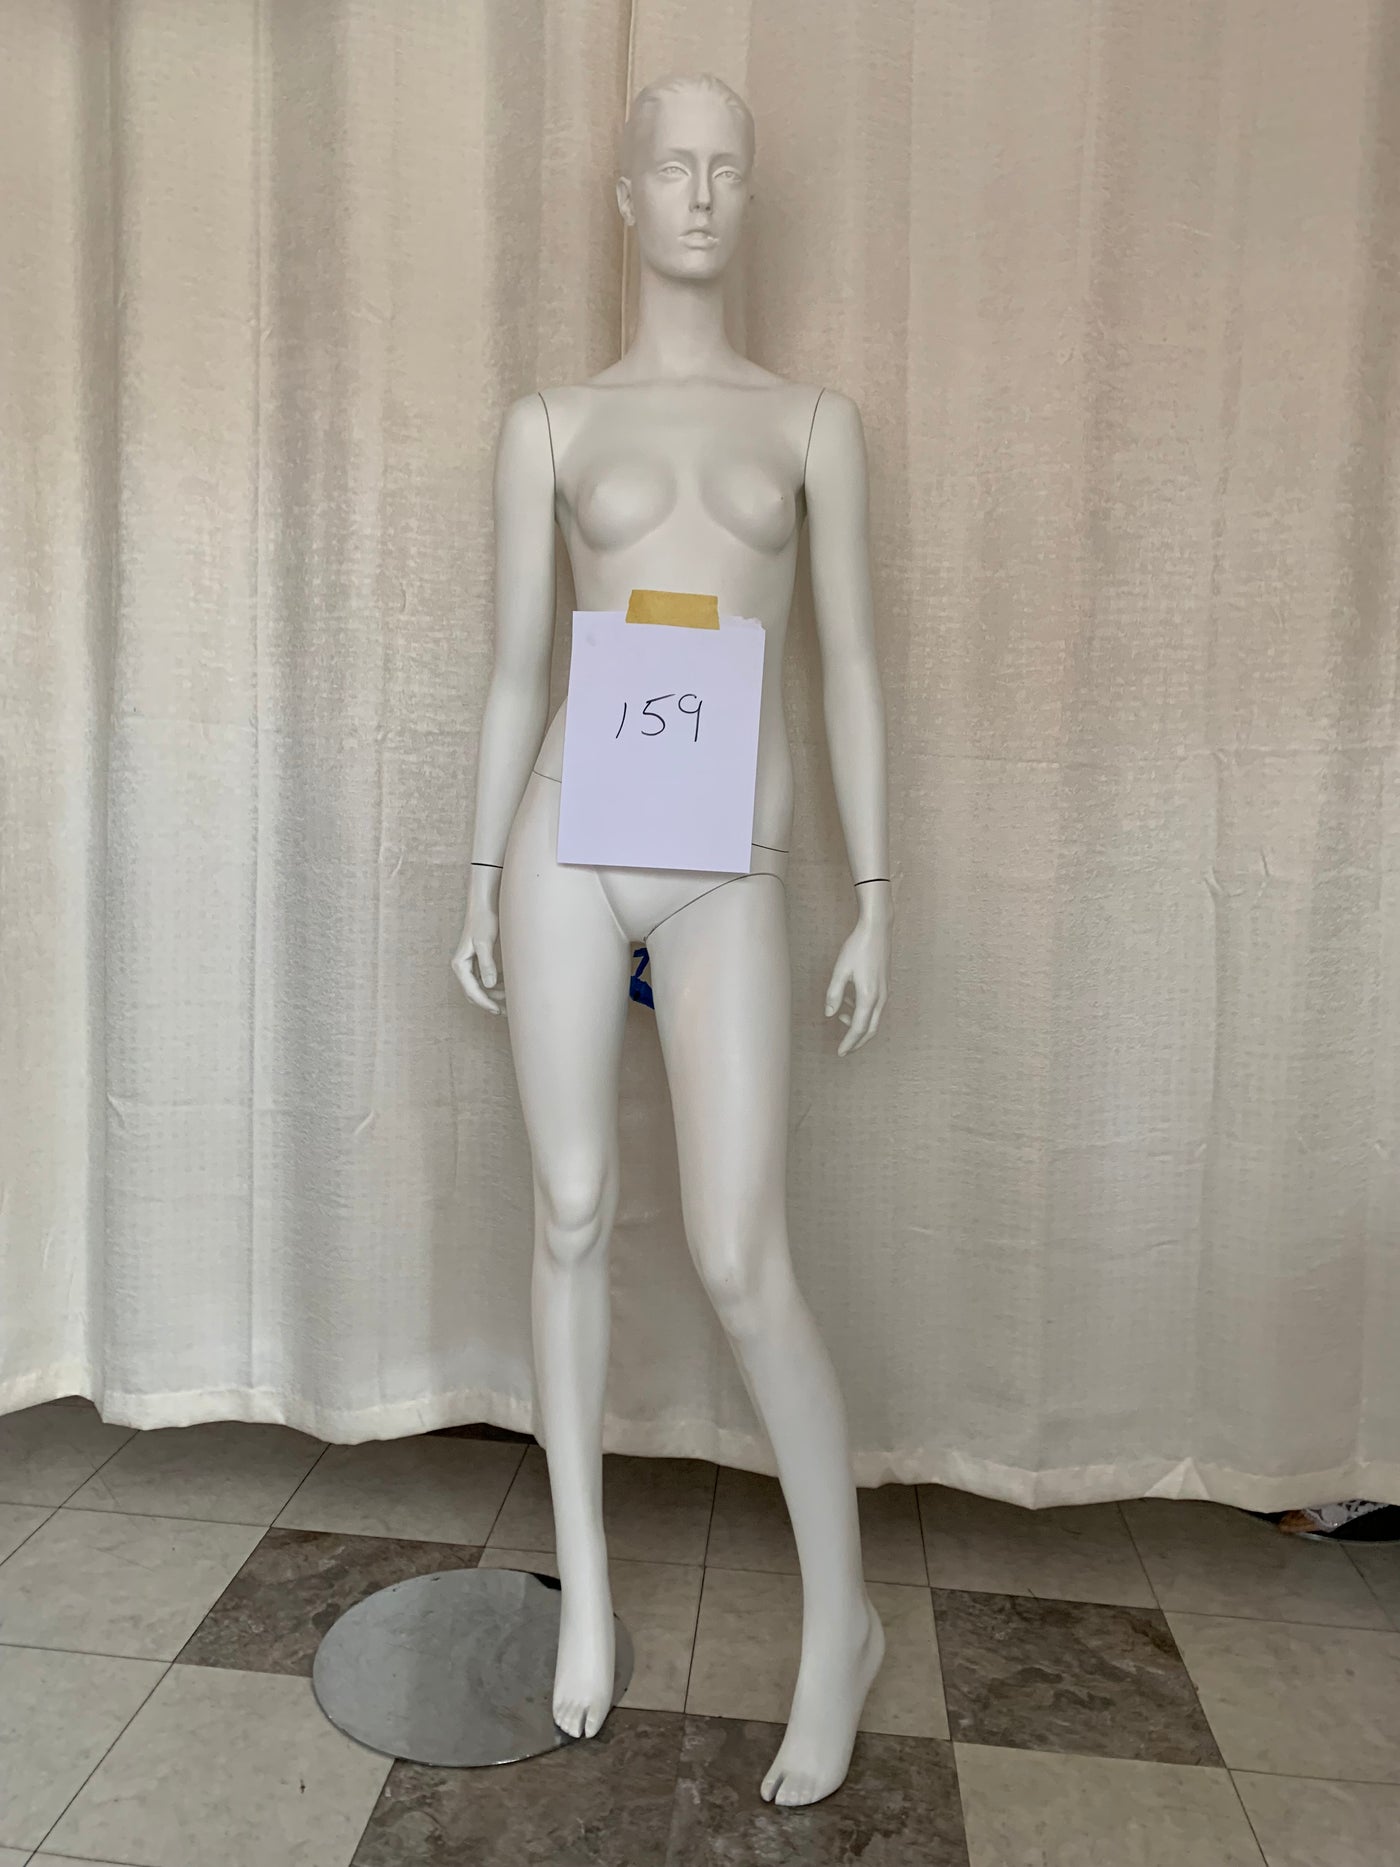 Used Female Adel Rootstein Mannequin  #159- Girl Thing